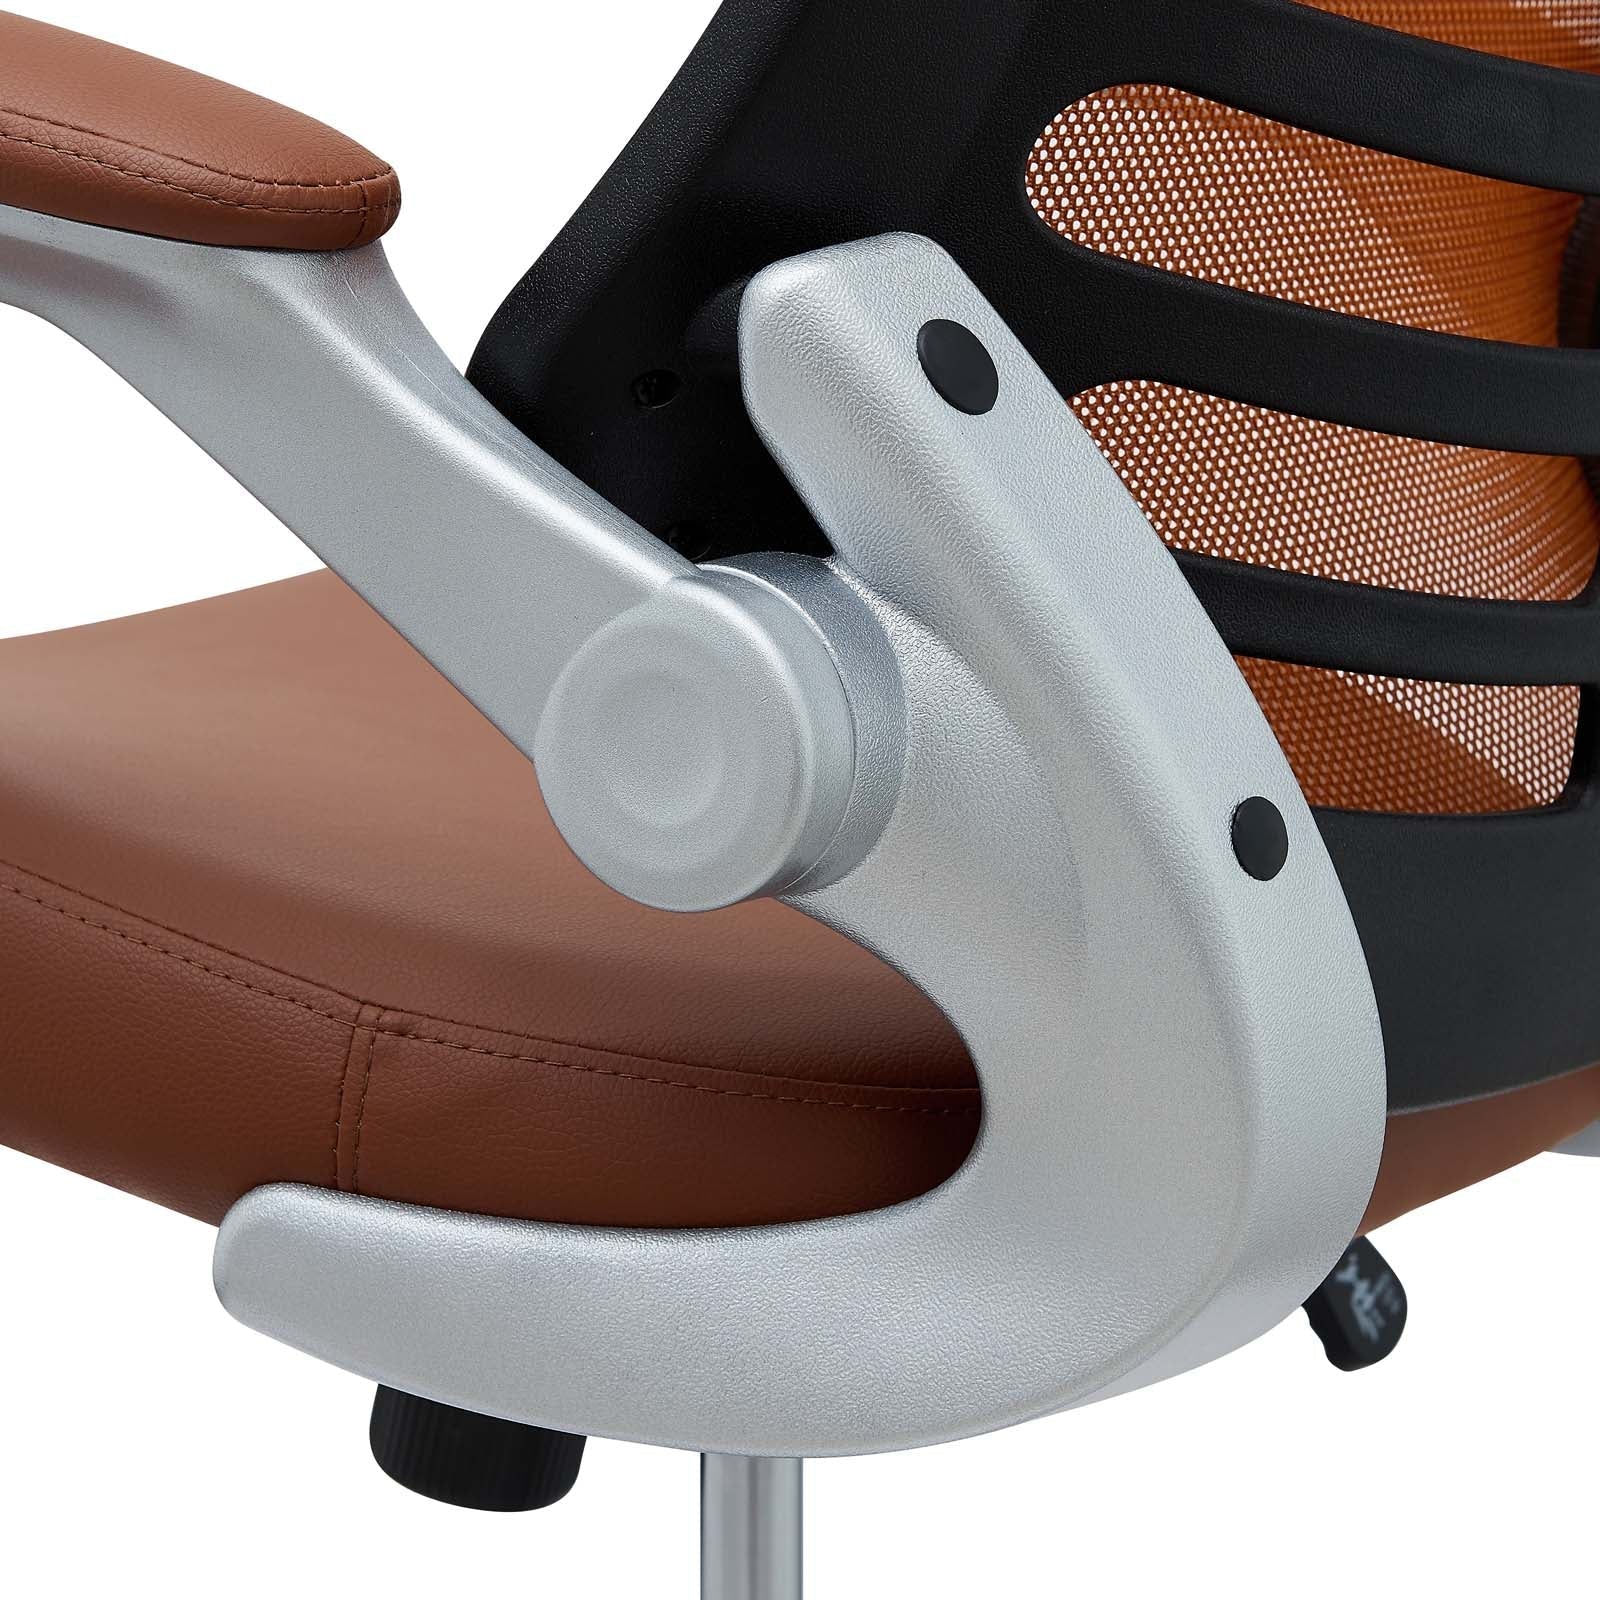 Elements Office Chair